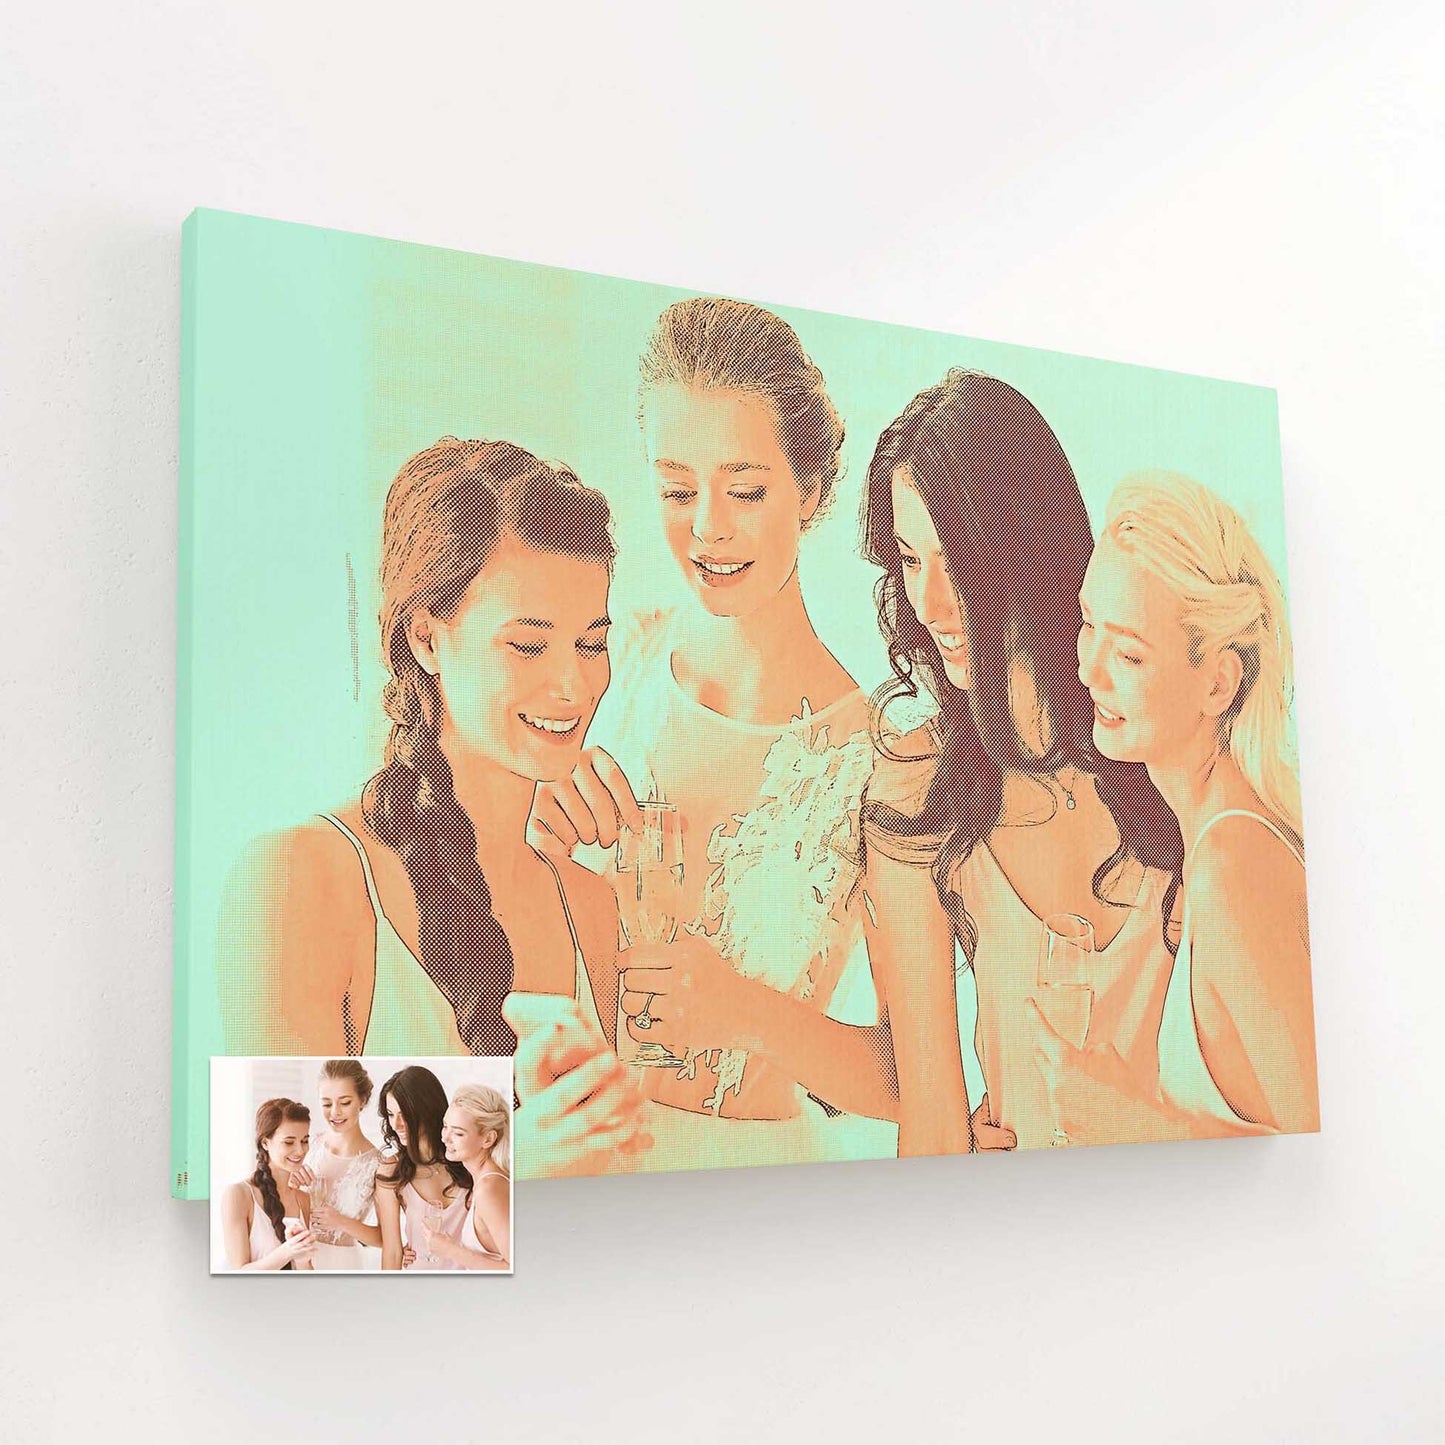 Celebrate the spirit of togetherness with the Personalised Orange and Green Canvas. This remarkable artwork, featuring a custom drawing from your photo, is expertly printed on a handmade woven canvas